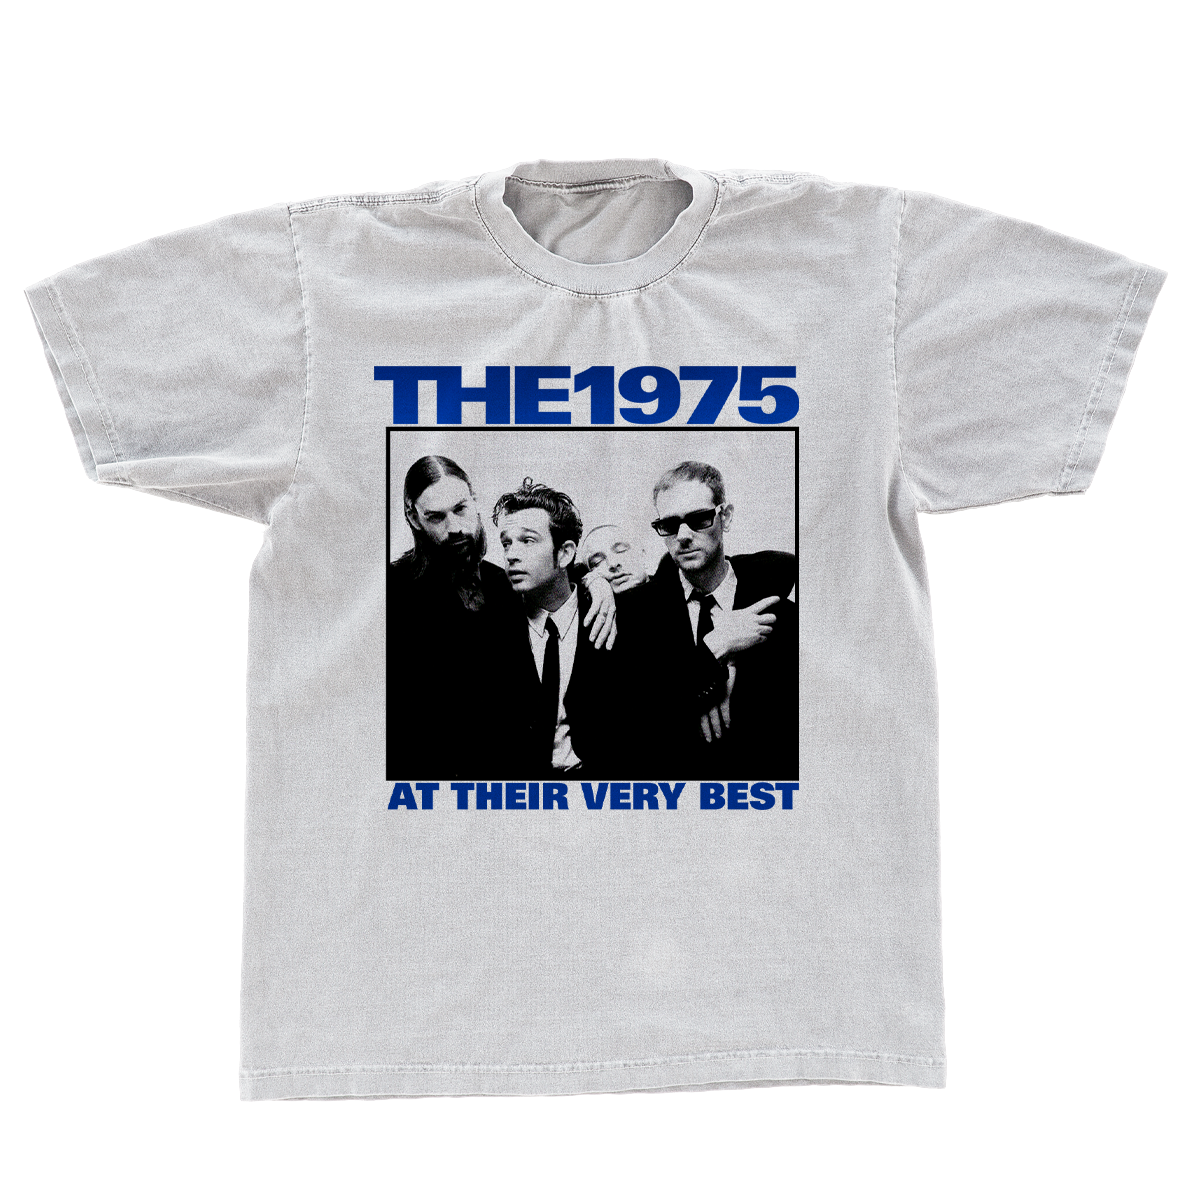 The 1975 - Finsbury Park At Their Very Best Event T-Shirt